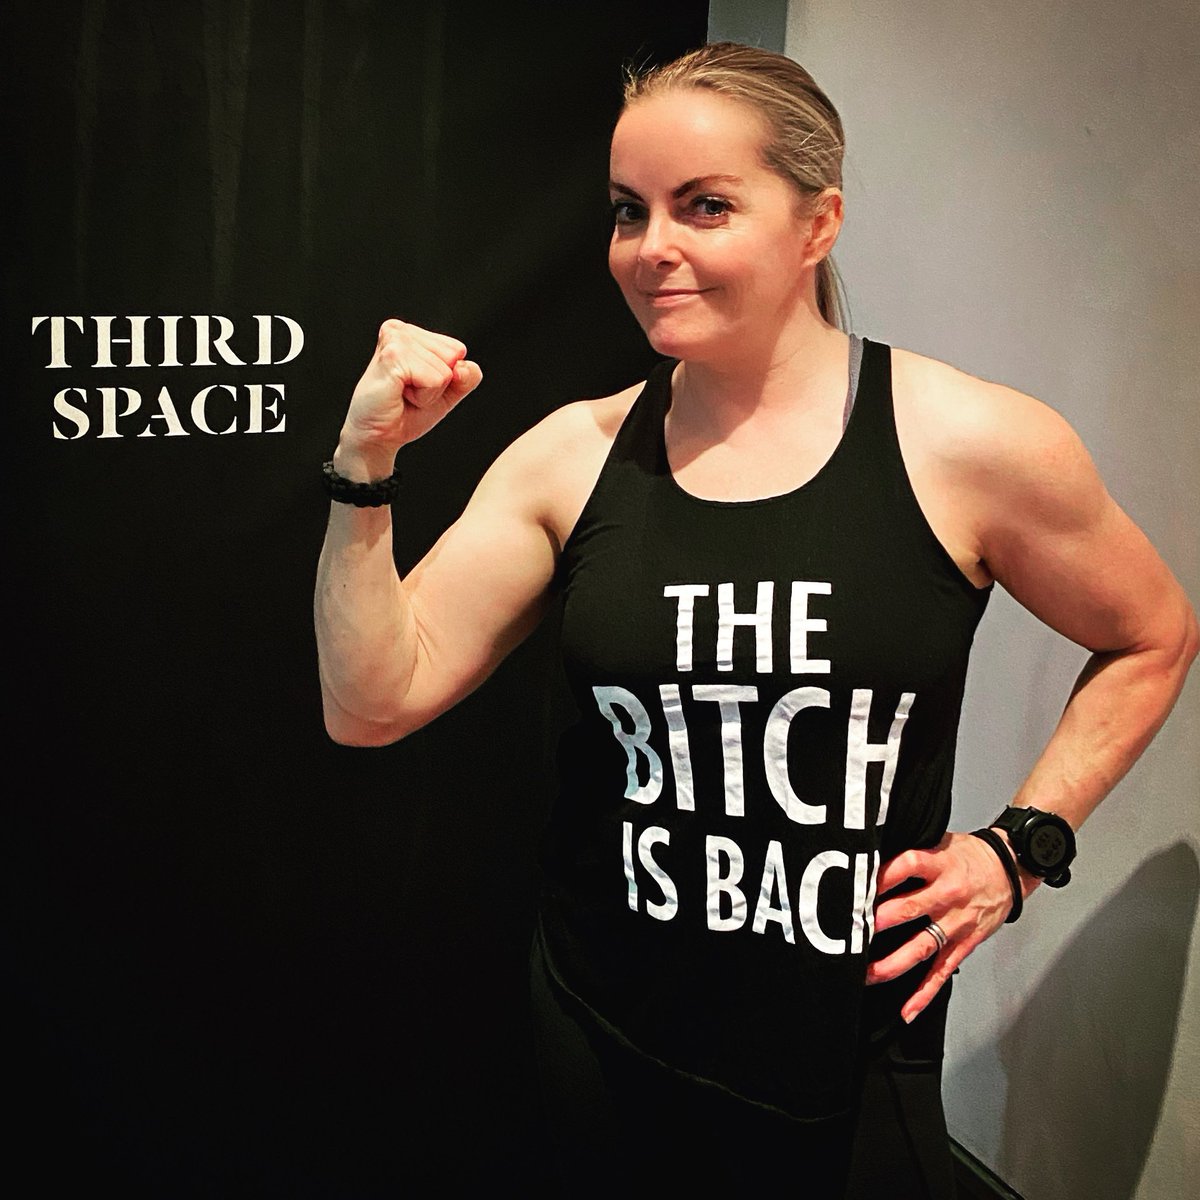 THE BITCH IS BACK 🥊 A great t-shirt for my 1st day back in the #gym ABSOLUTELY loved it! I did: Deadlifts - Shoulder Press - Leg Press - Lat Pull down - Single Leg Extension - Single Leg Hamstring Curl - Pallof Press - Cable Rotation - 20 mins bike What did you do? #training